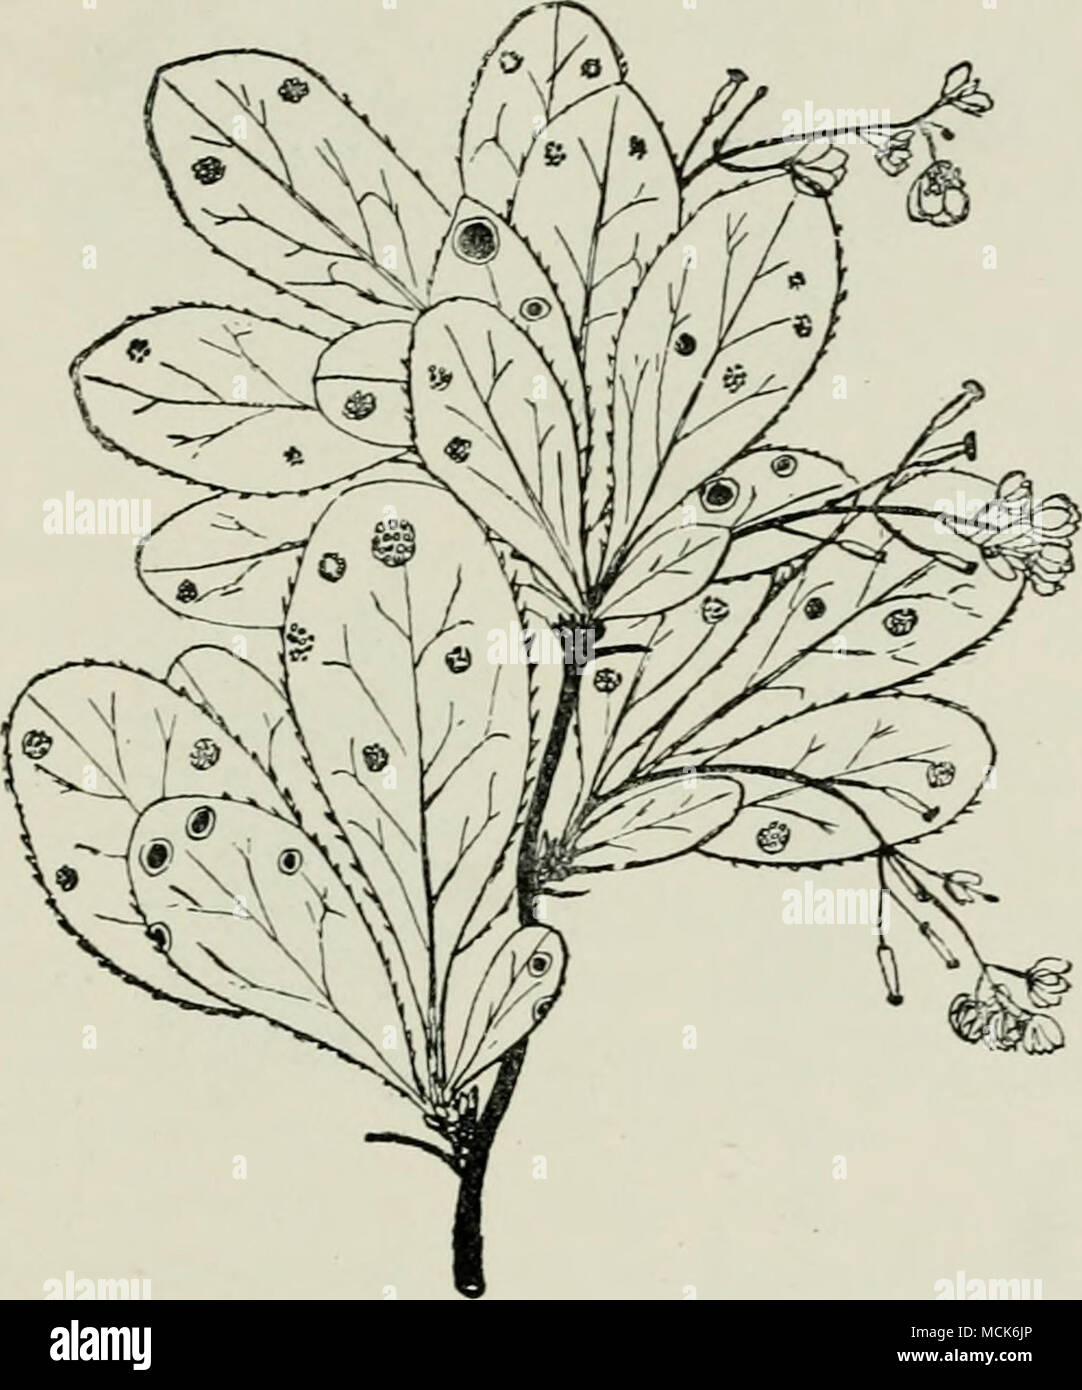 . Fig. 183.âPuccinia (/raminis {Aecidium herheridis) on Berberis convmunis. The lowest leaf and two others are seen on the upper surface, and show red spots with light margins, in which the pycnidia are embedded. The other leaves show the under surface with patches of aecidia. (v. Tubeuf del.) to their neighbours to form the peridium. Diseased portions of leaves become considerably thickened. The cells of the single layer of palisade parenchyma are abnormally elongated, and the intercellular spaces of the spongy parenchyma, instead of being large, are small and filled with mycelium. The aecidi Stock Photo